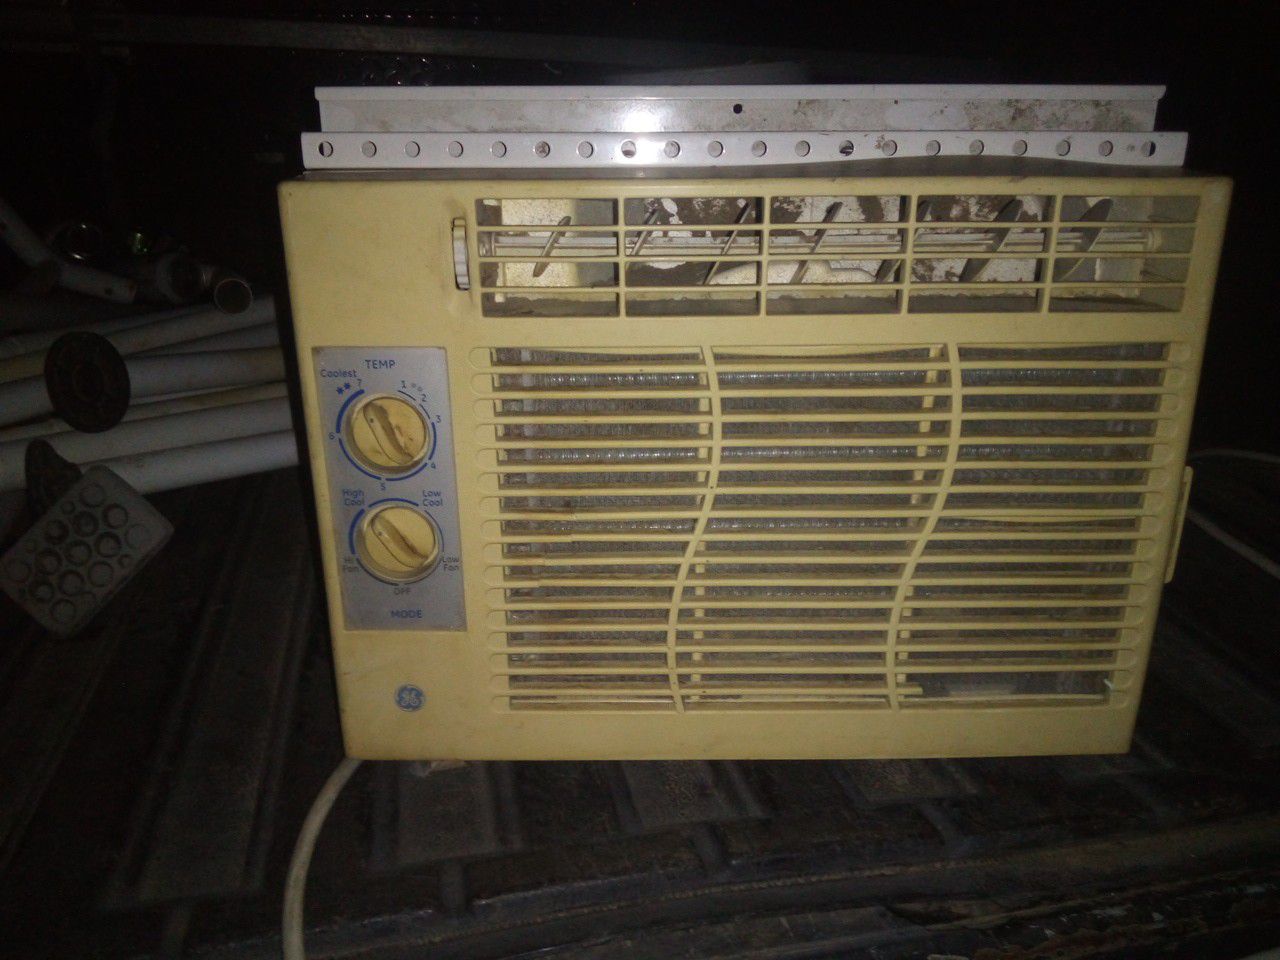 Ge air conditioner works great